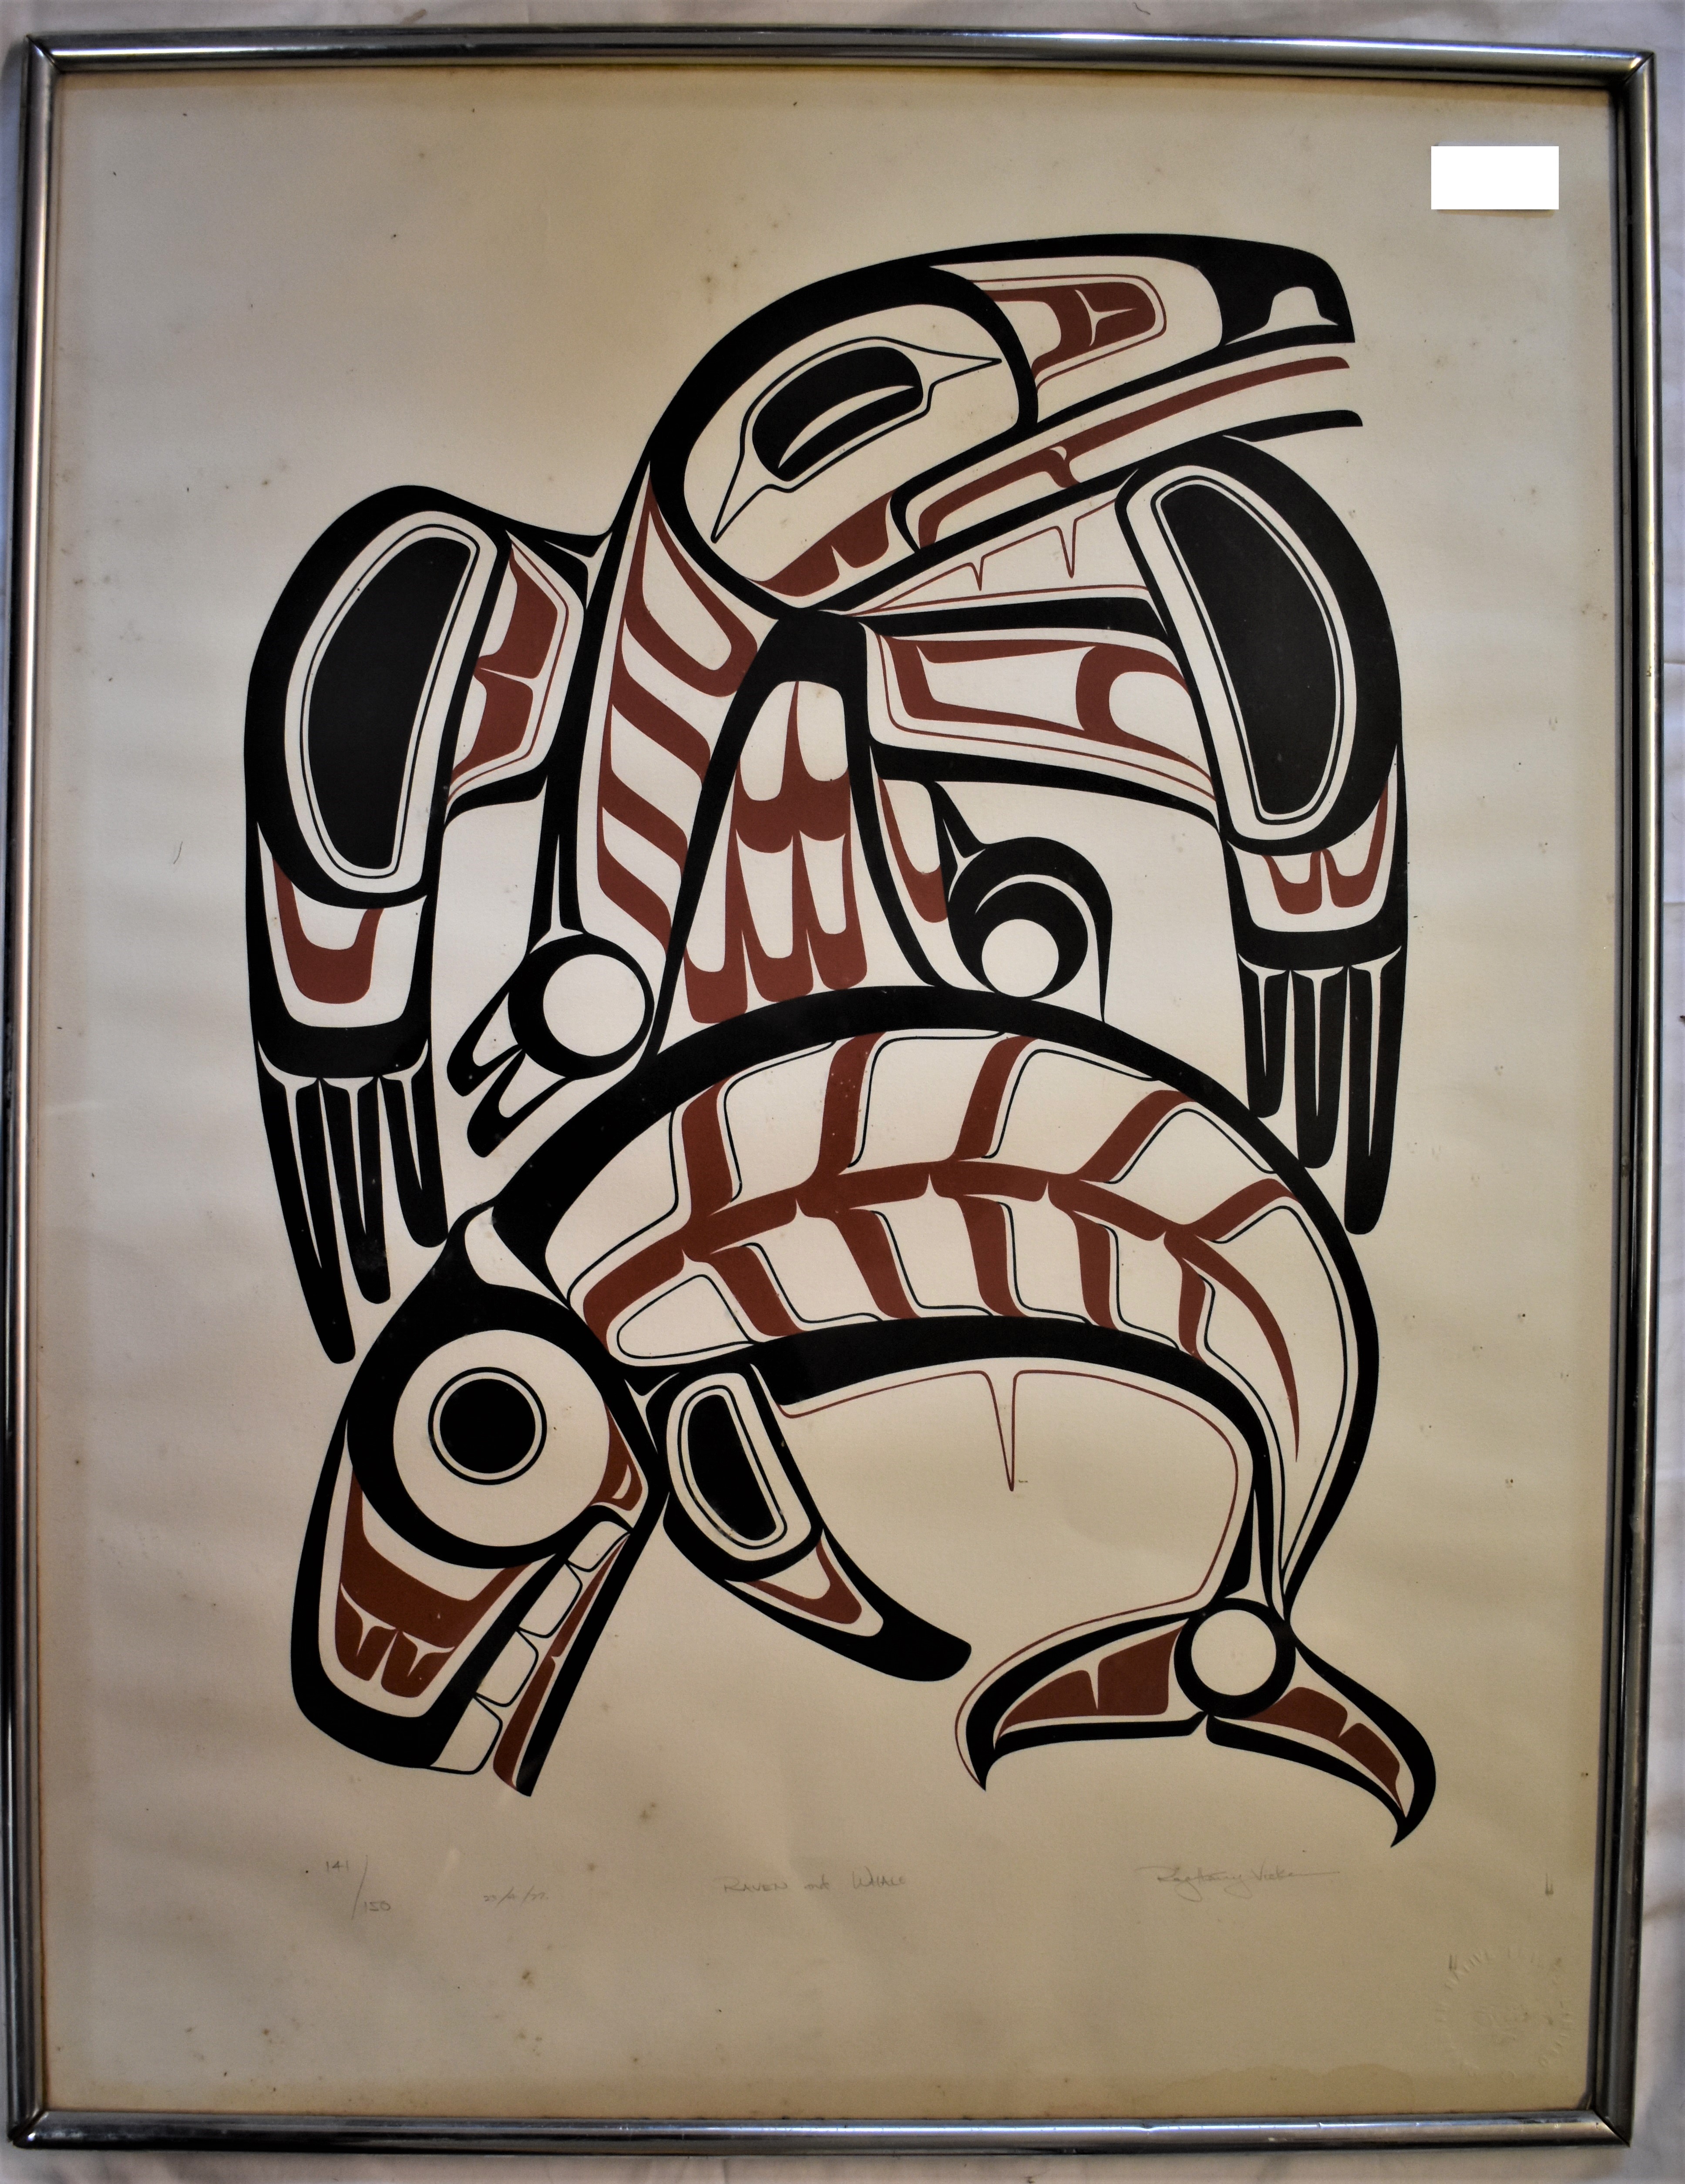 Raven and Whale by Roy Henry Vickers the famous Tsimshian Tribe Northwest Coast Indian Artist, this